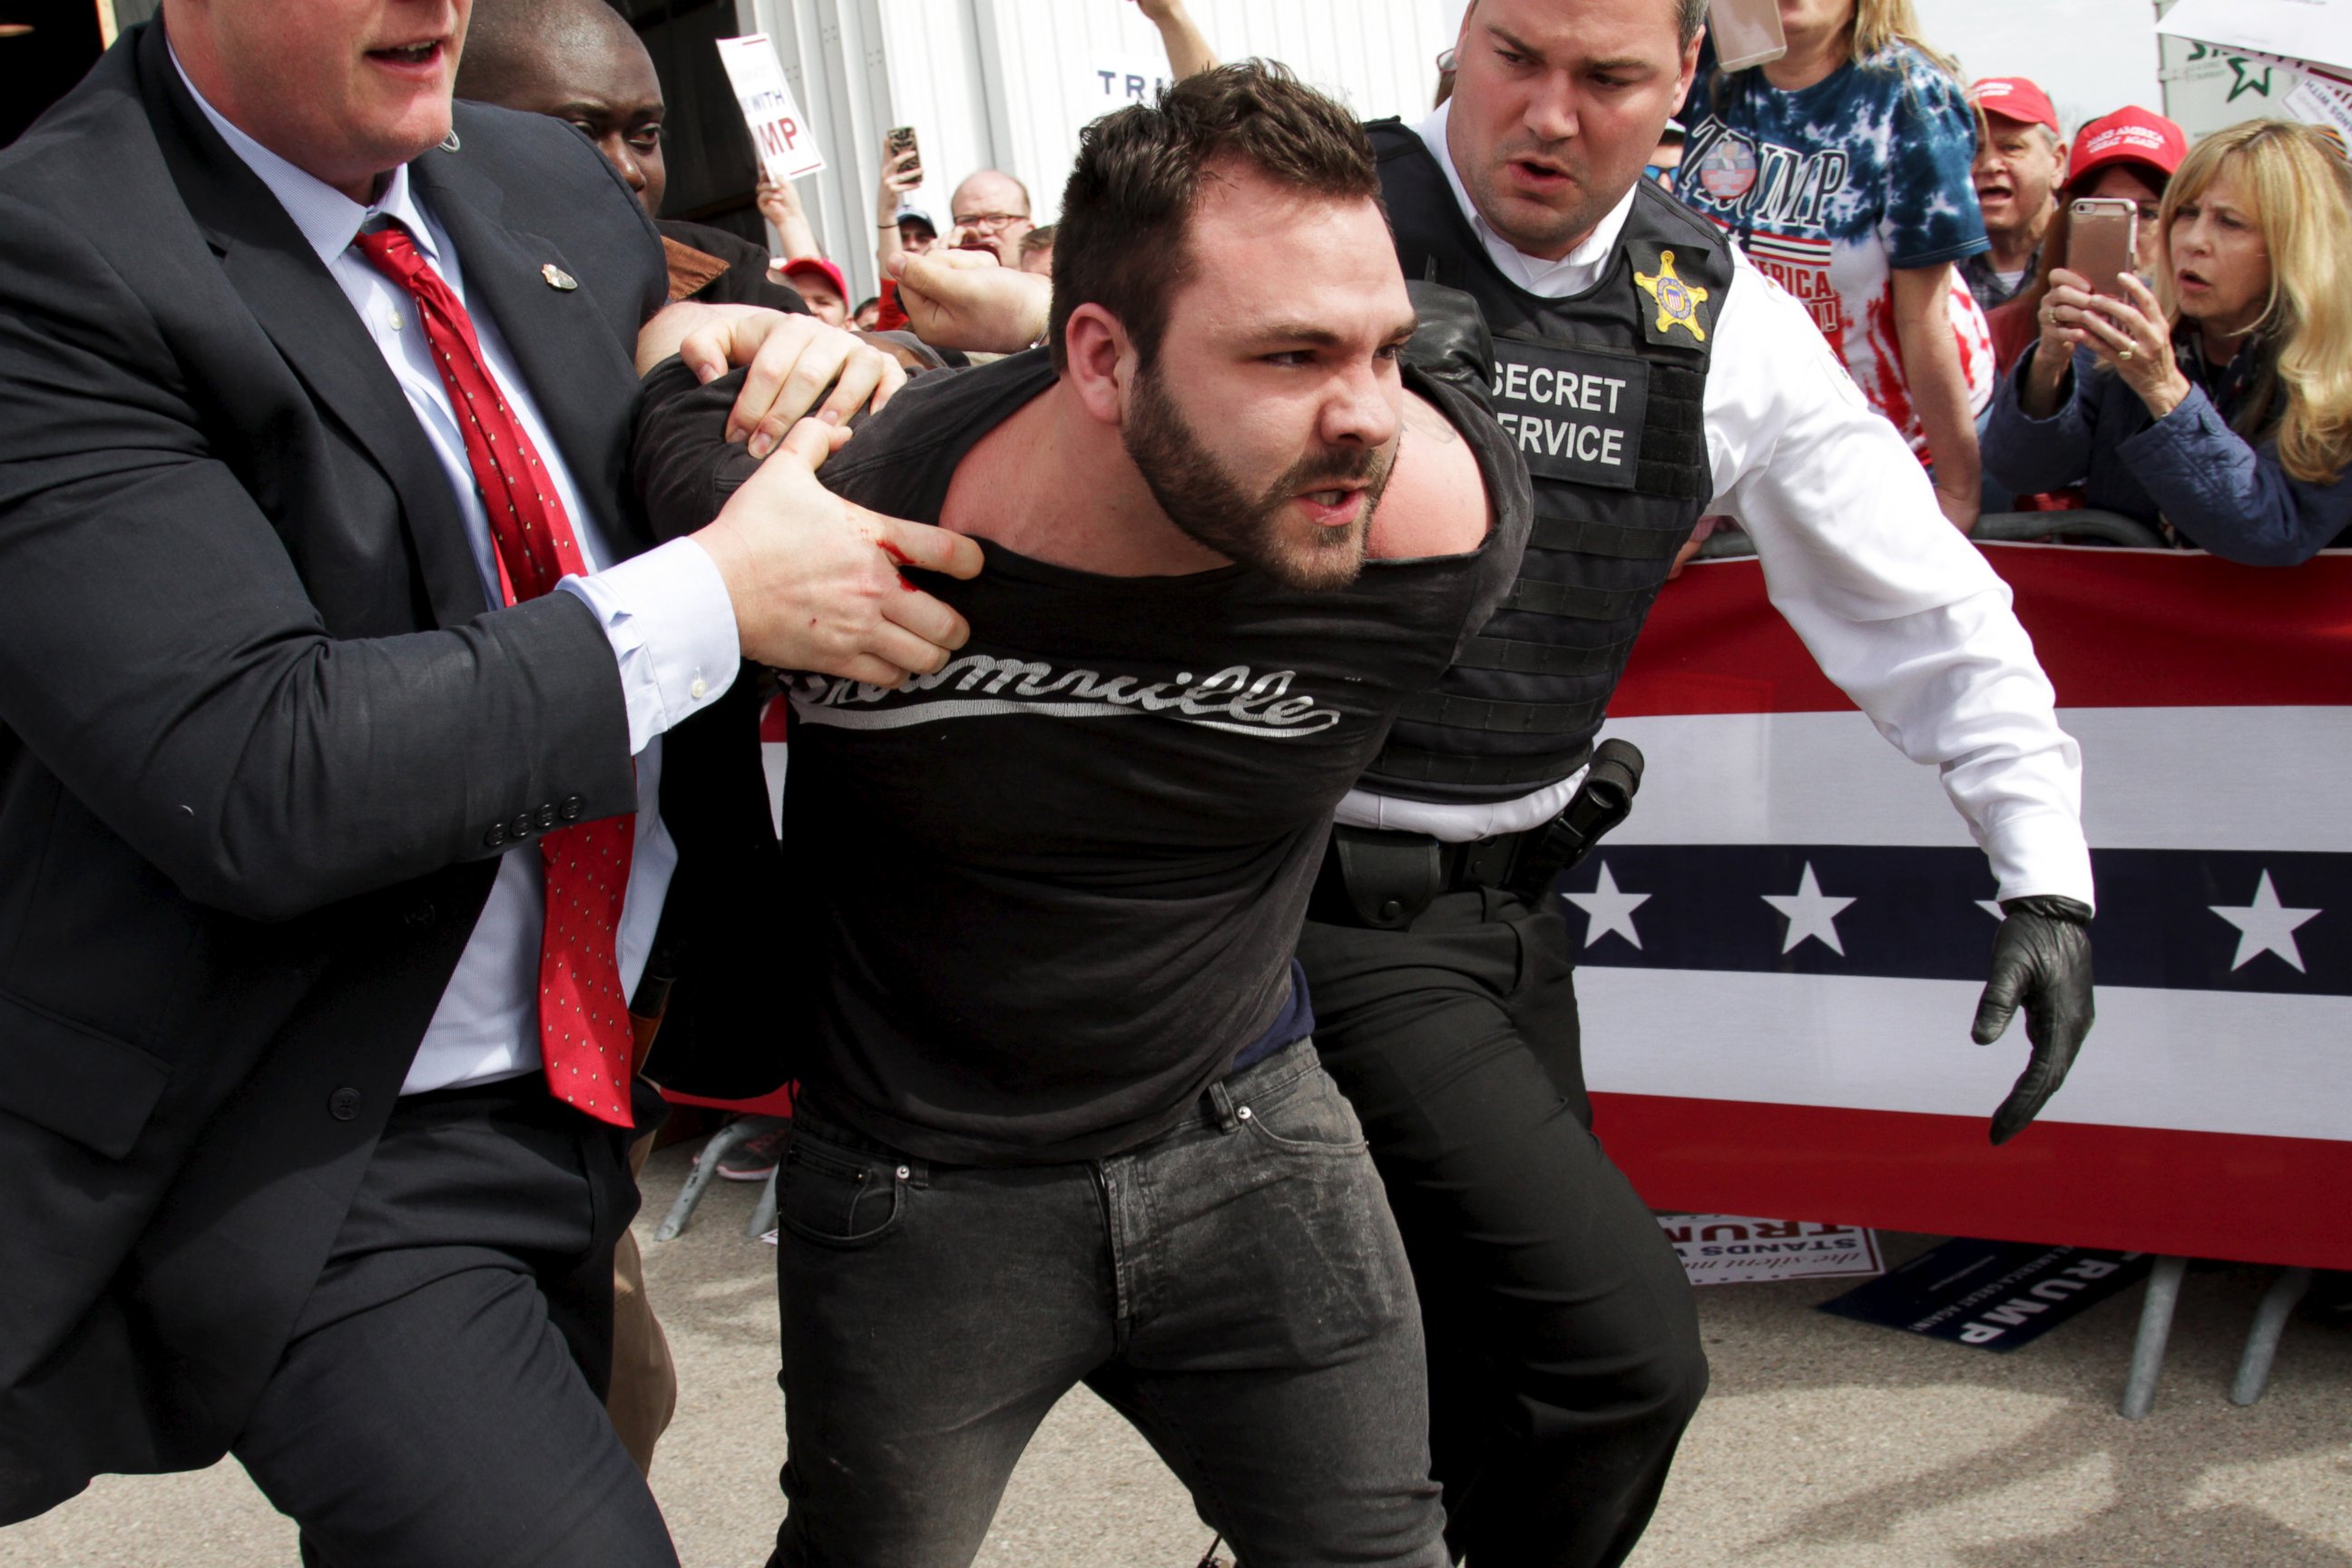 PHOTO: U.S. Secret Service agents detain a man after a disturbance as Republican presidential candidate Donald Trump spoke at Dayton International Airport in Dayton, Ohio, March 12, 2016.  